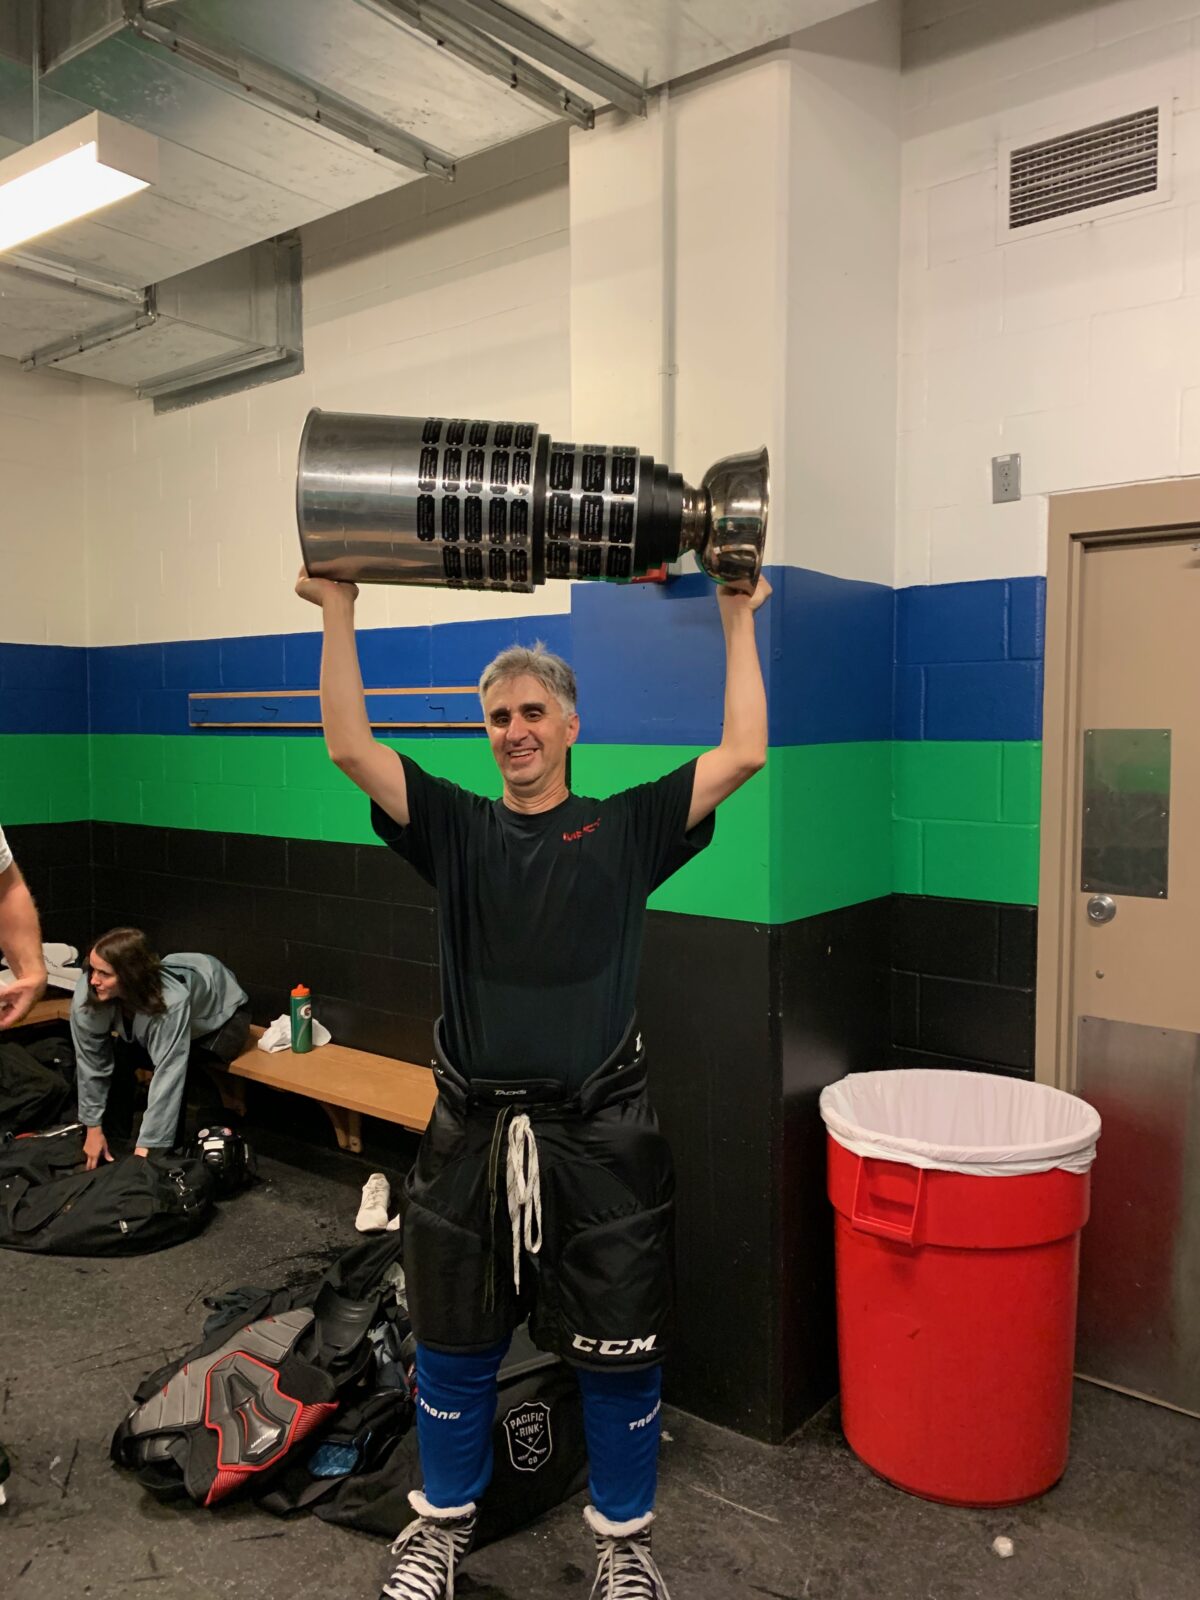 The author hoists the replica Stanley Cup after winning his league championship.